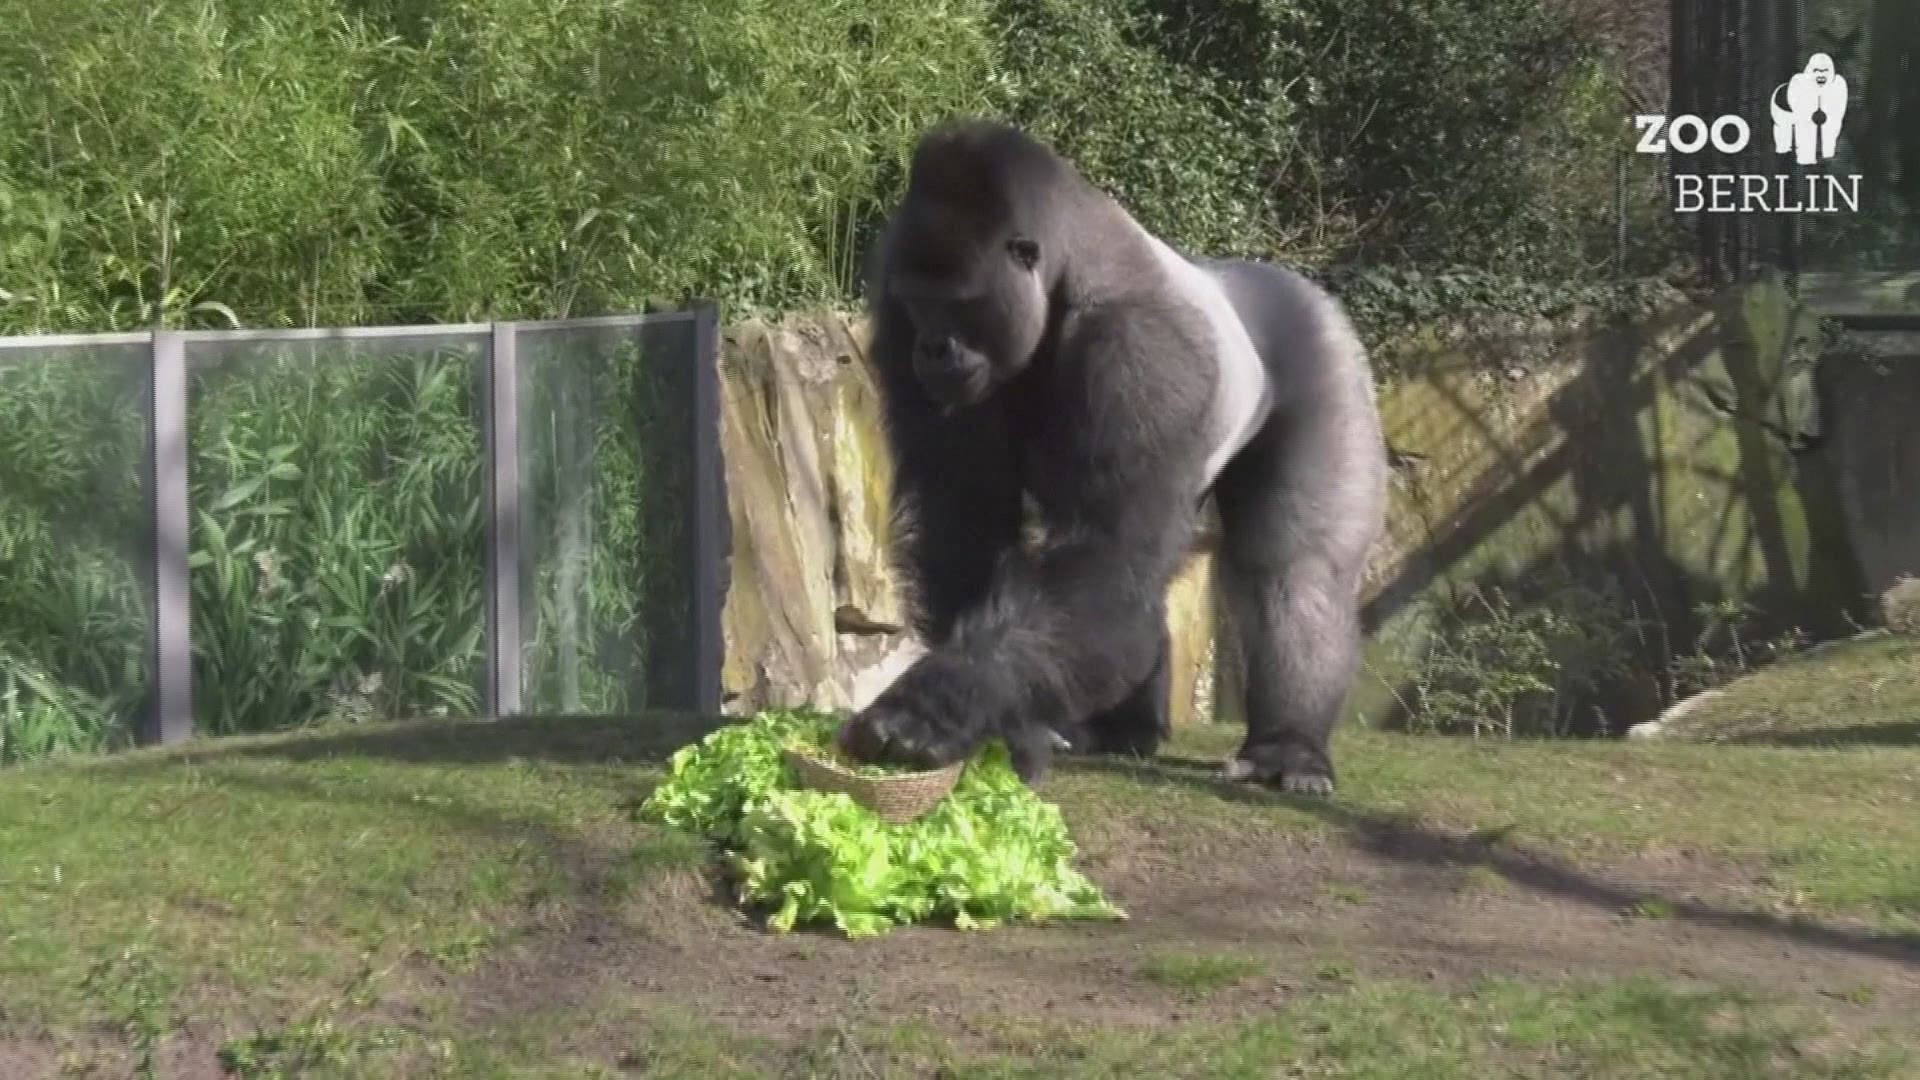 A silverback gorilla dad tried to grab all the treats for himself after the gorilla family was rewarded with Easter eggs in a basket of salad leaves.